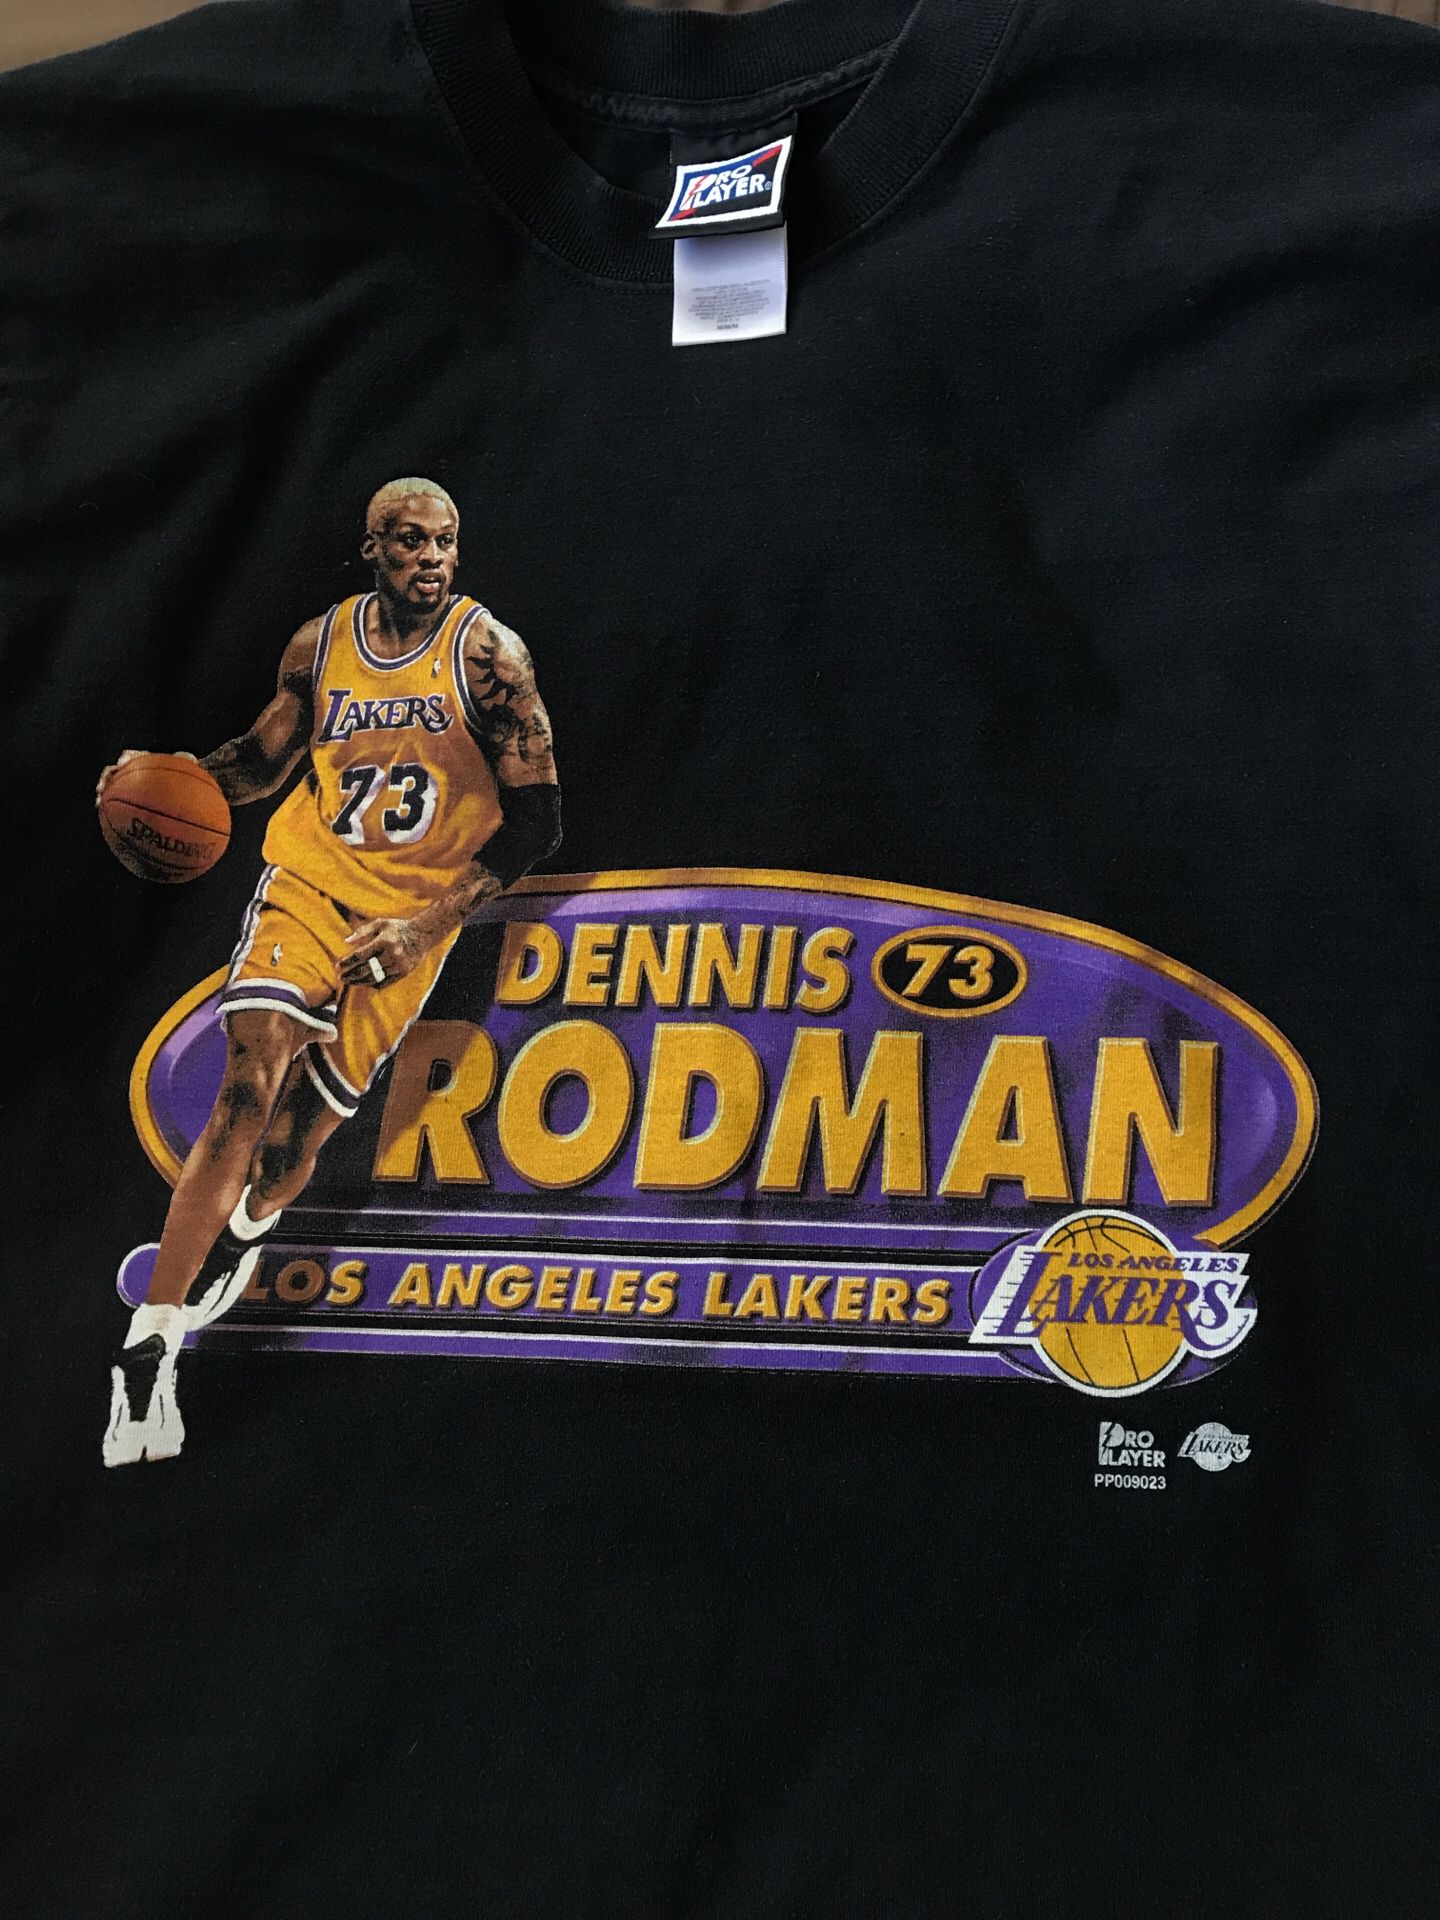 Dennis Rodman Vintage Lakers Jersey for Sale in Los Angeles, CA - OfferUp